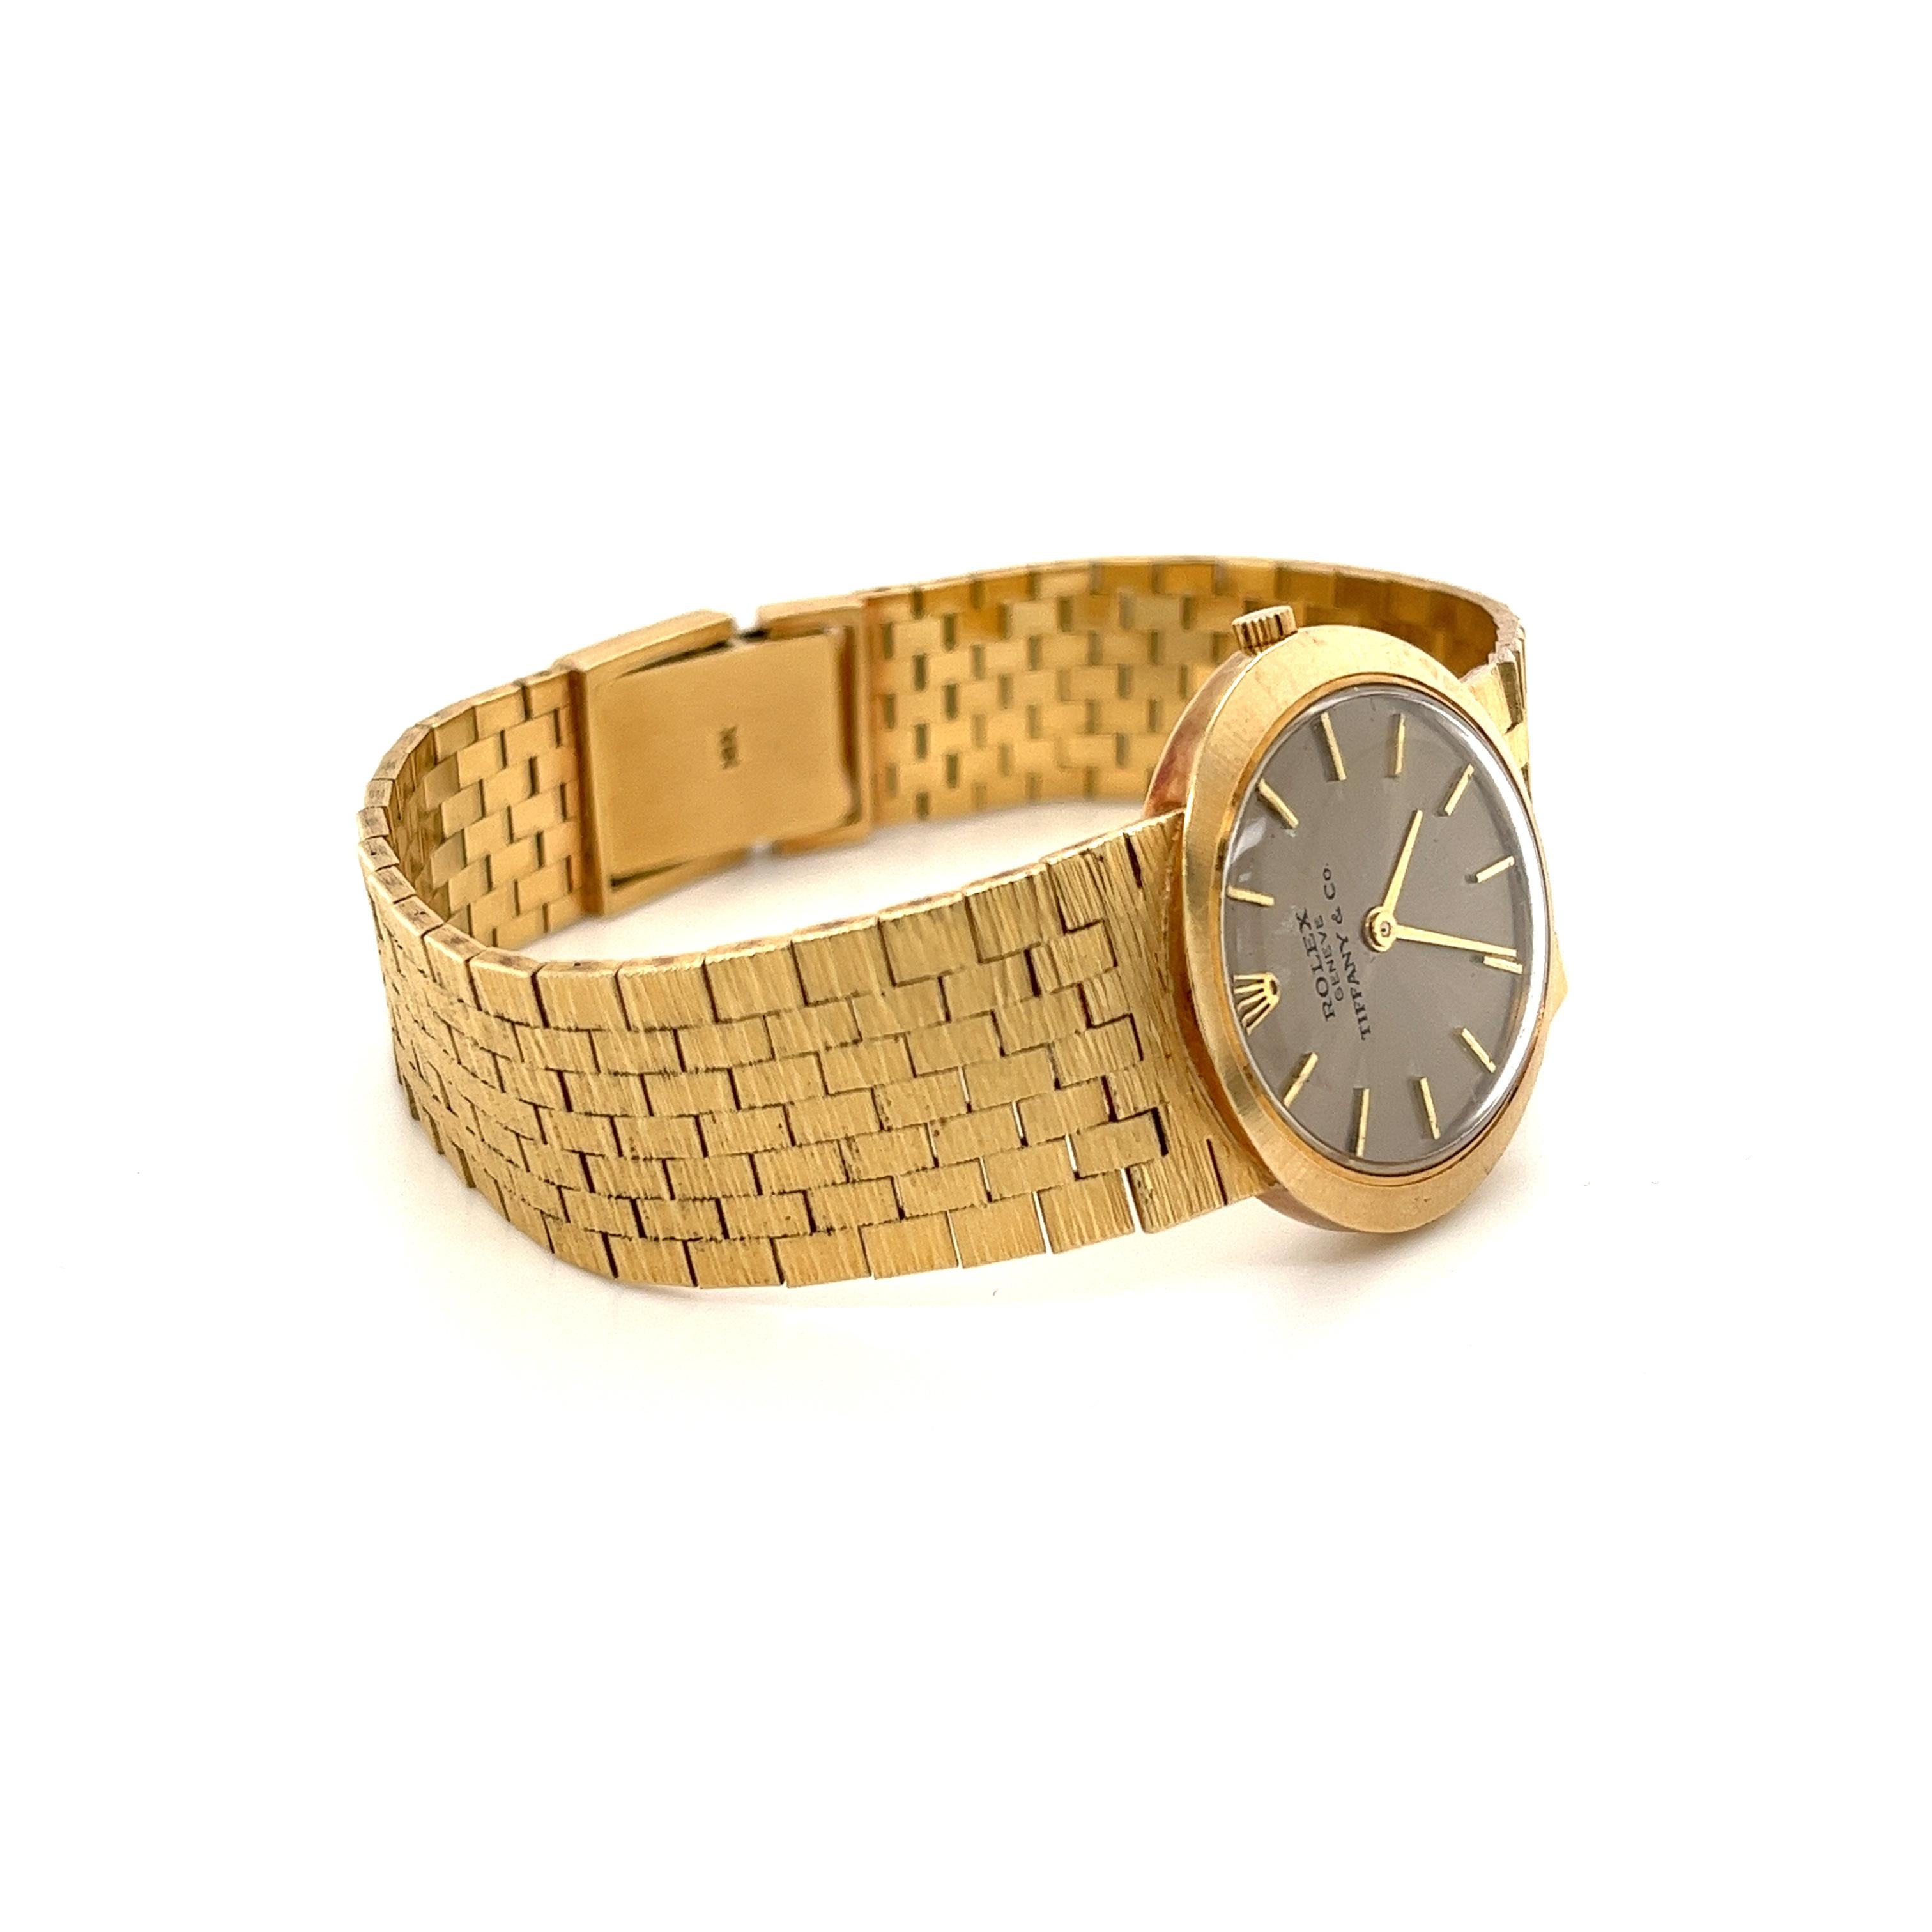 Vintage Rolex swiss-made wristwatch for Tiffany & Co,. Expertly handcrafted with a 14k solid yellow gold integral bracelet. Ideal for the seasoned watch collector and perfect for those in search of a vintage brand watch that isn't the typical cookie